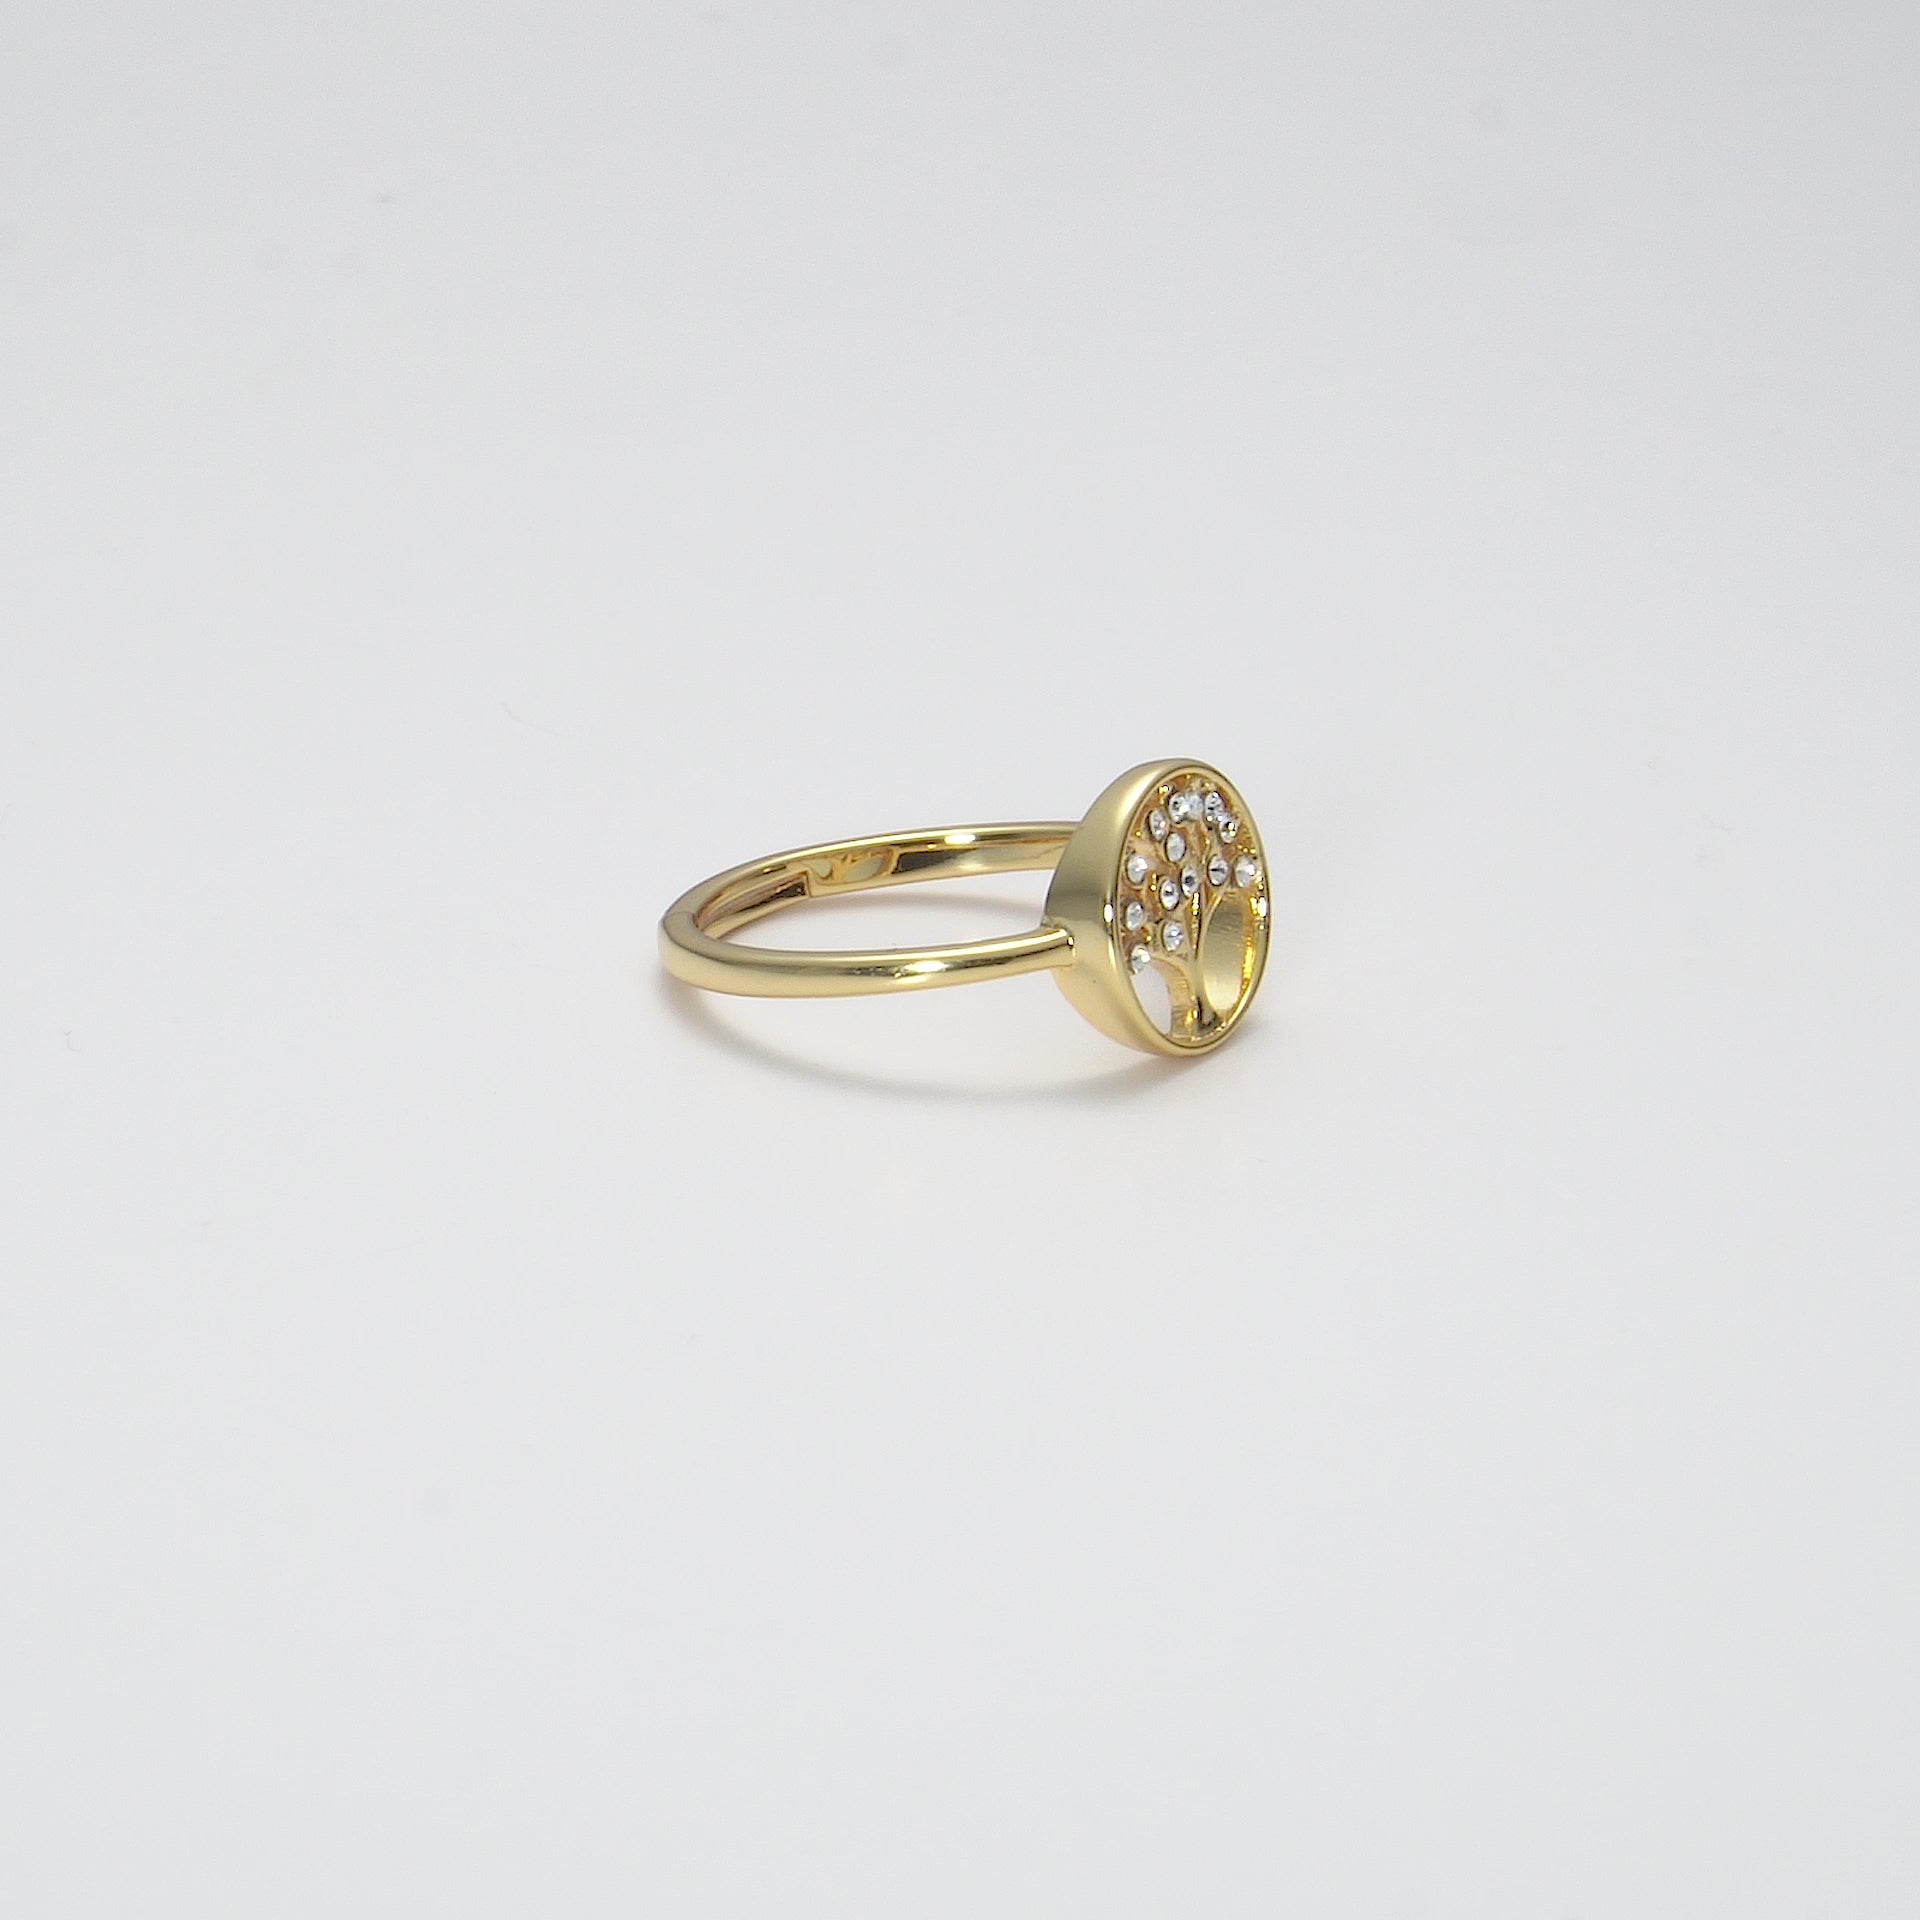 Gold Plated Adjustable Tree of Life Ring Created with Zircondia® Crystals